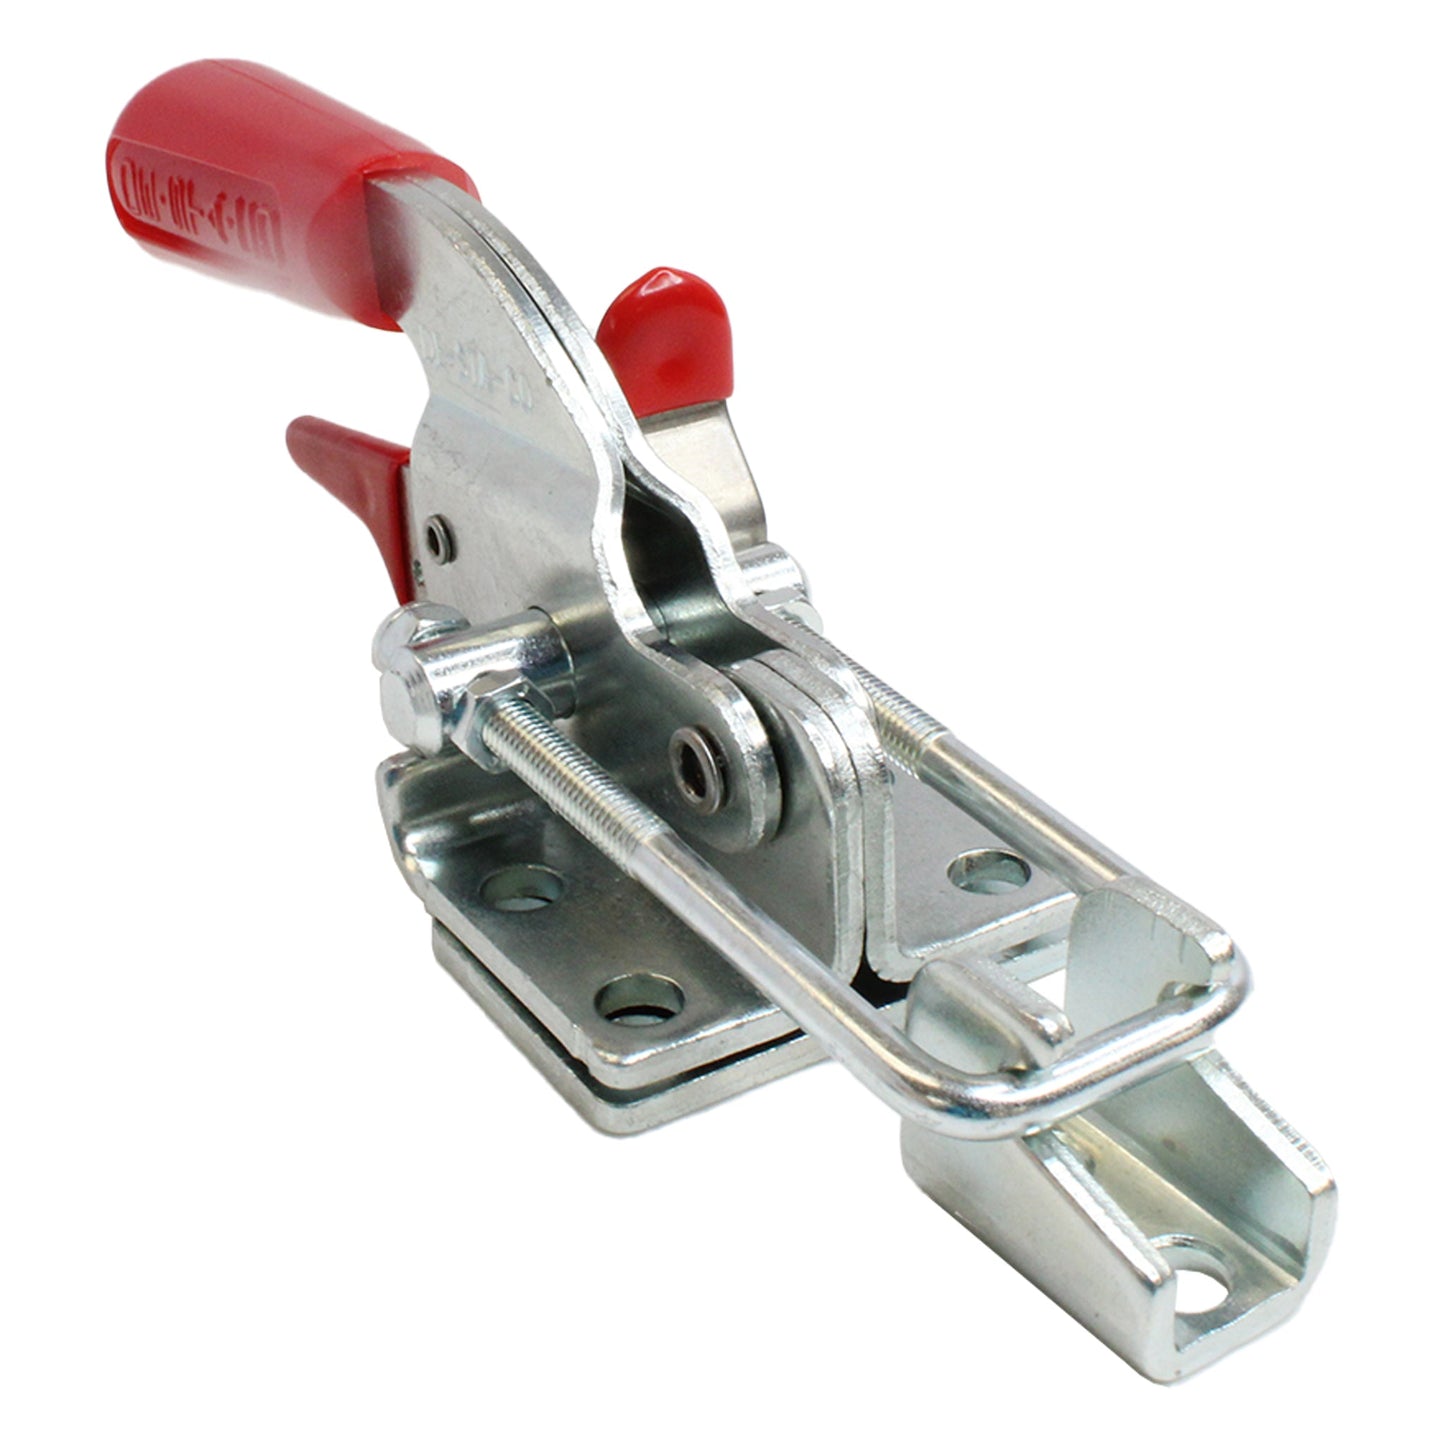 DESTACO 331-R PULL ACTION LATCH CLAMP